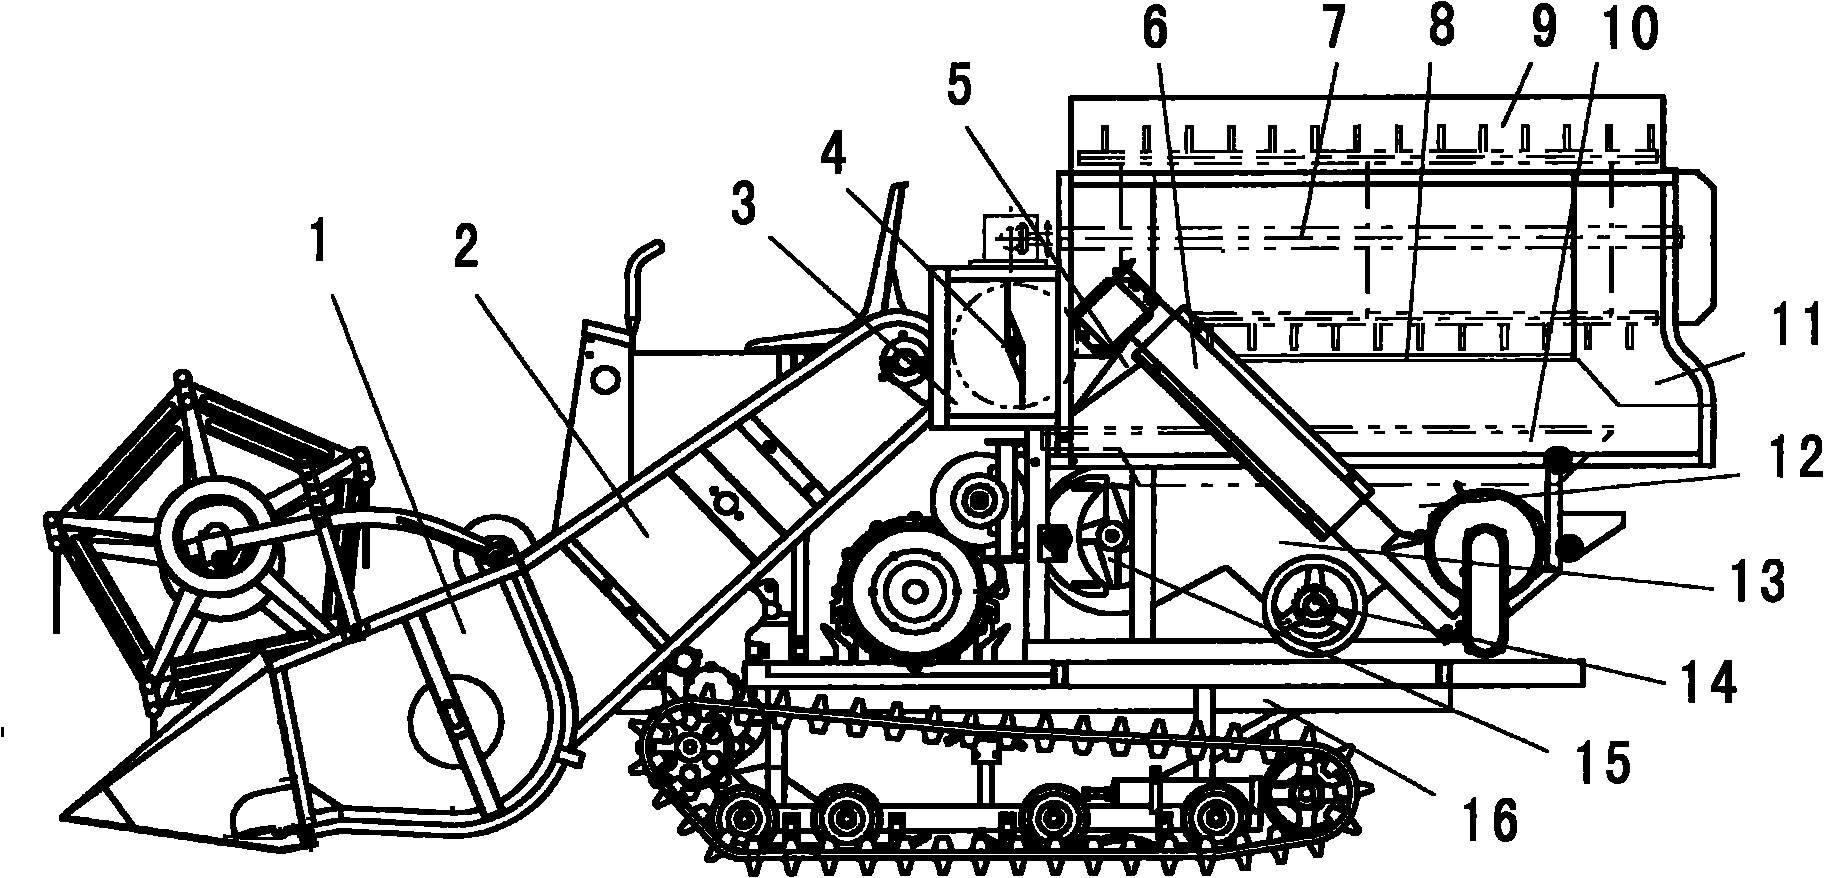 Longitudinal axial flow threshing device of whole-feed combine harvester